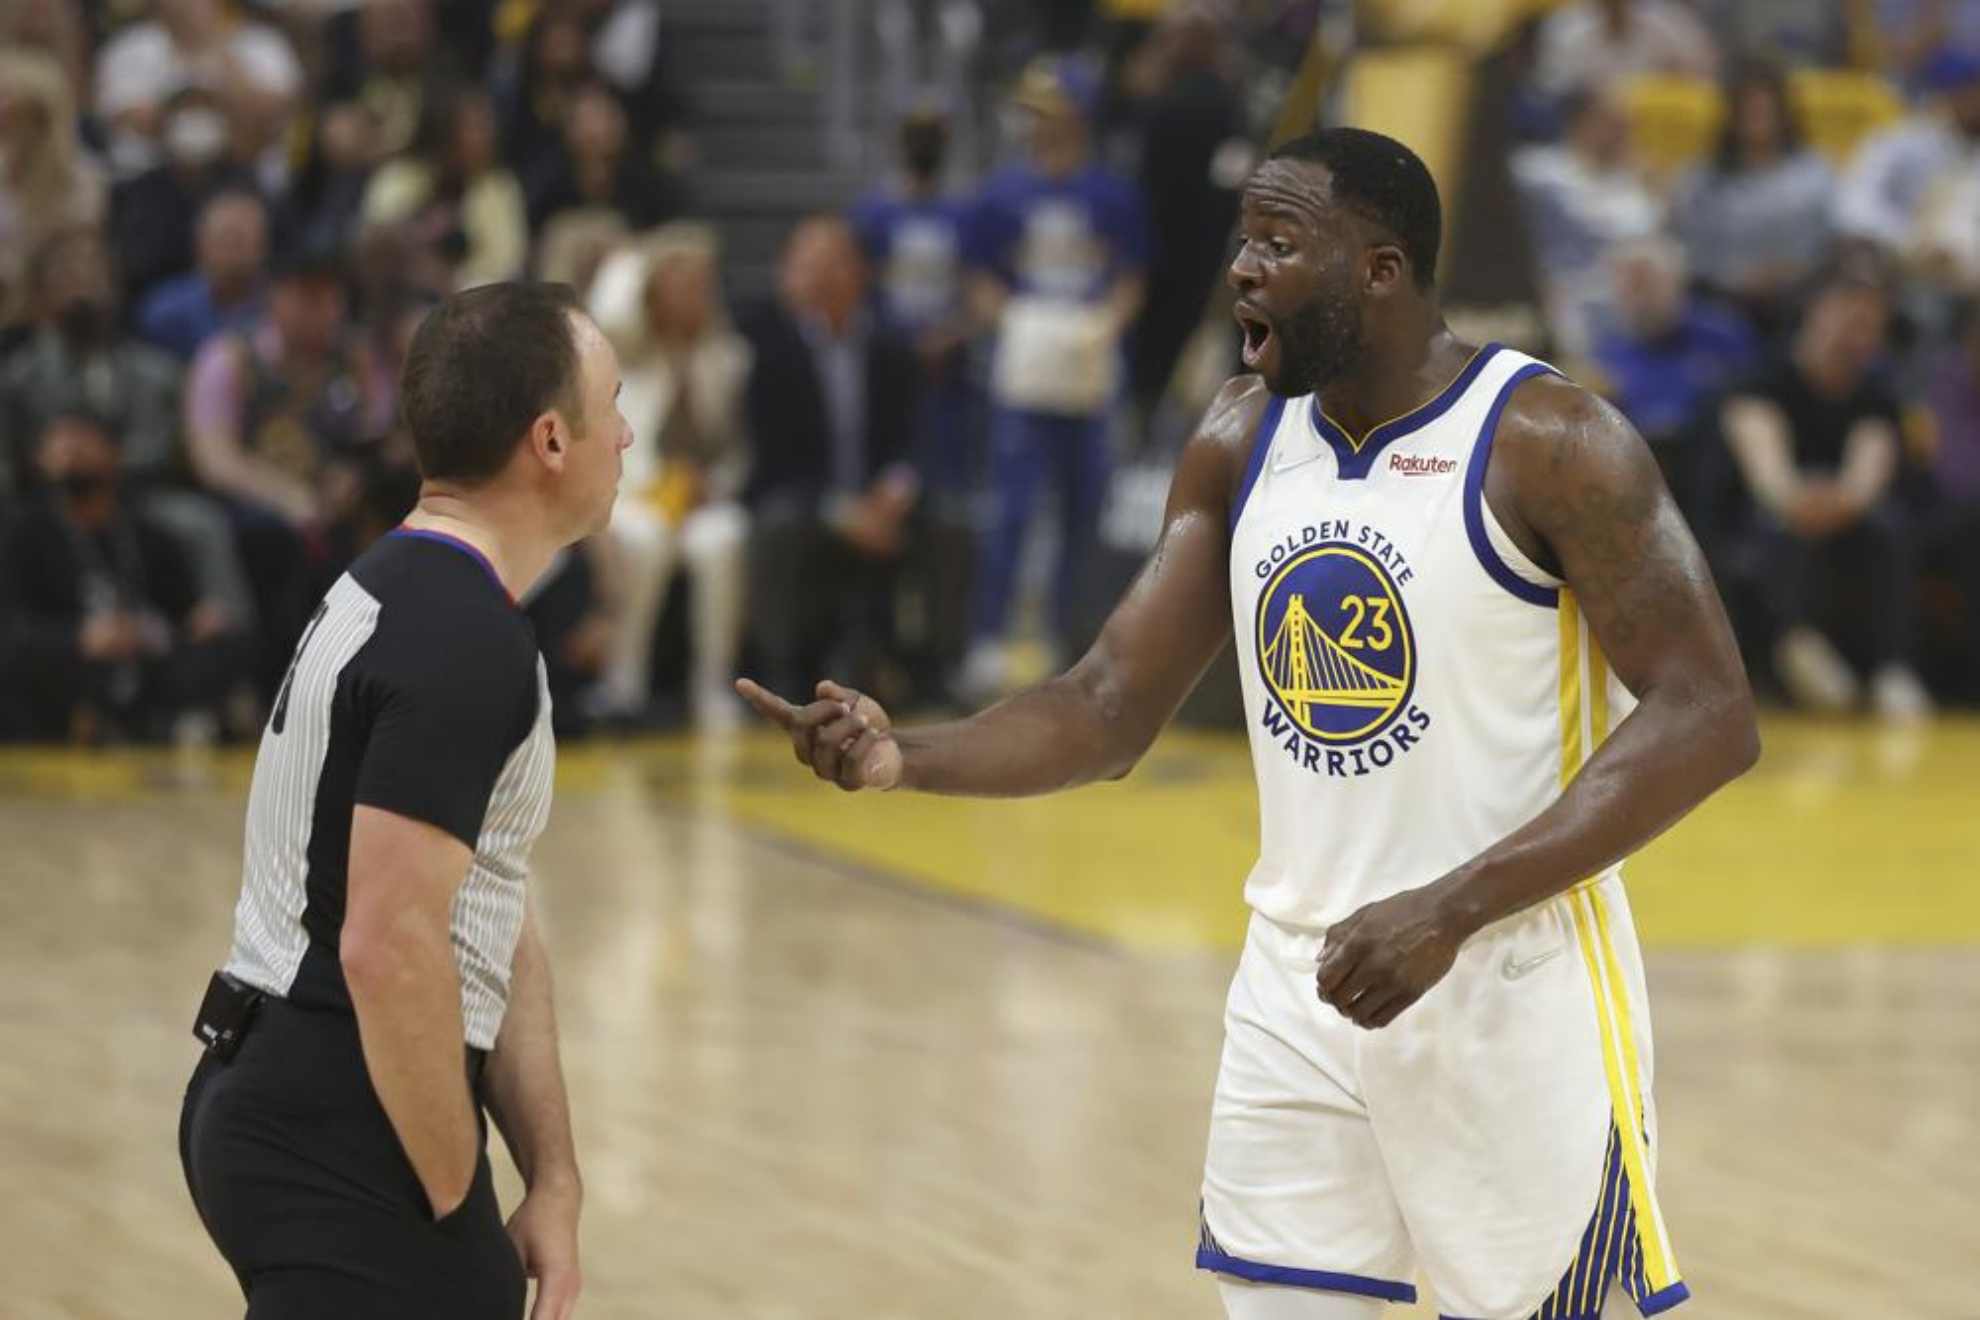 Draymond Green arguing with the referee of an NBA game. - AP Photo/Jed Jacobsohn